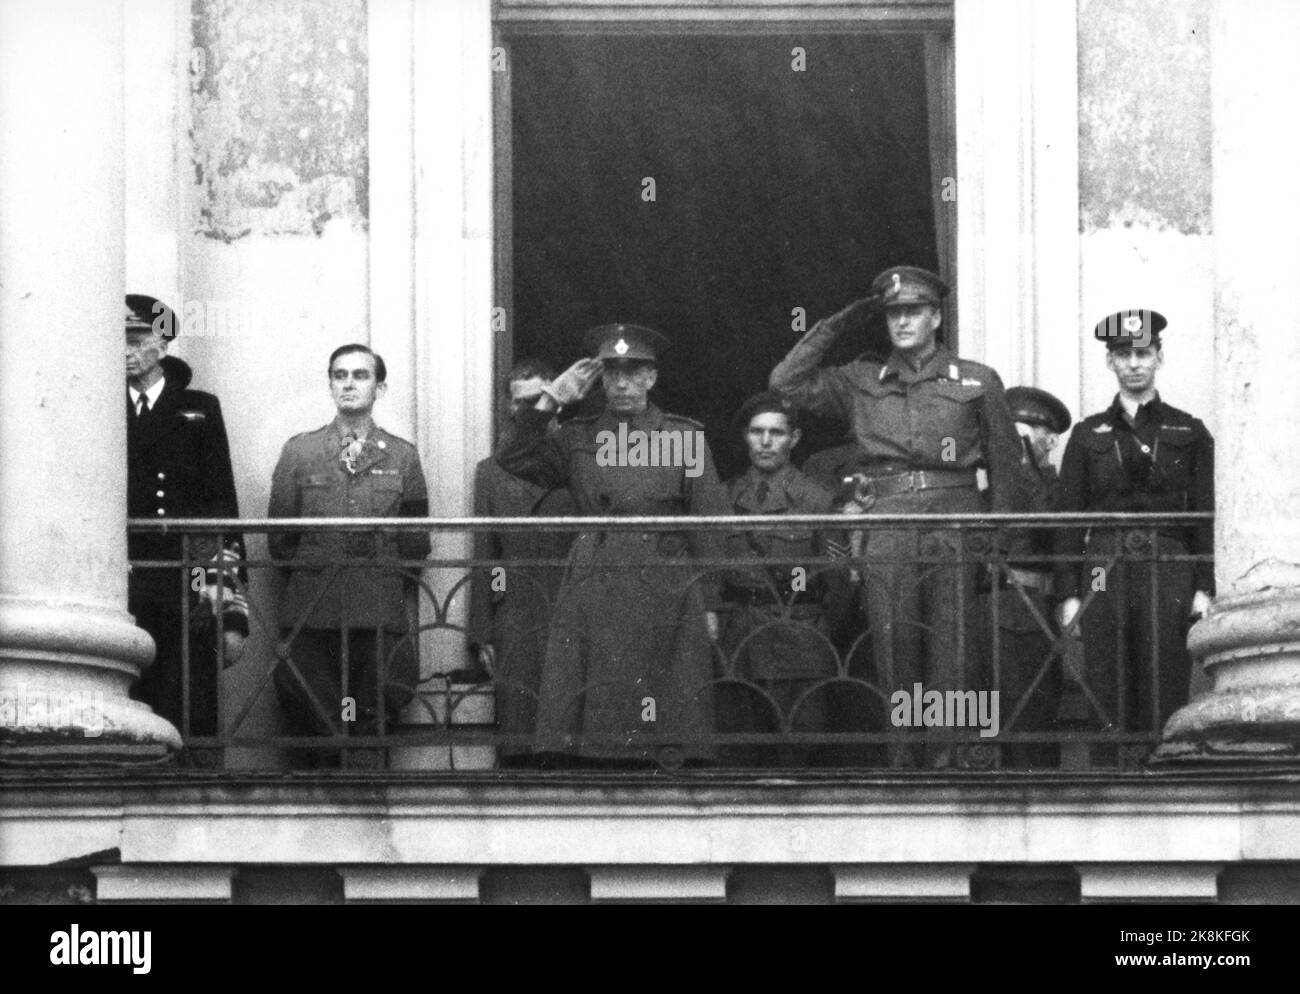 Oslo 19450517: The first May 17 in Oslo after World War II. Crown Prince Olav stood on the castle balcony in Uniform (TH). He is honored. Count Folke Bernadotte stood with him, etc. Photo: NTB Stock Photo